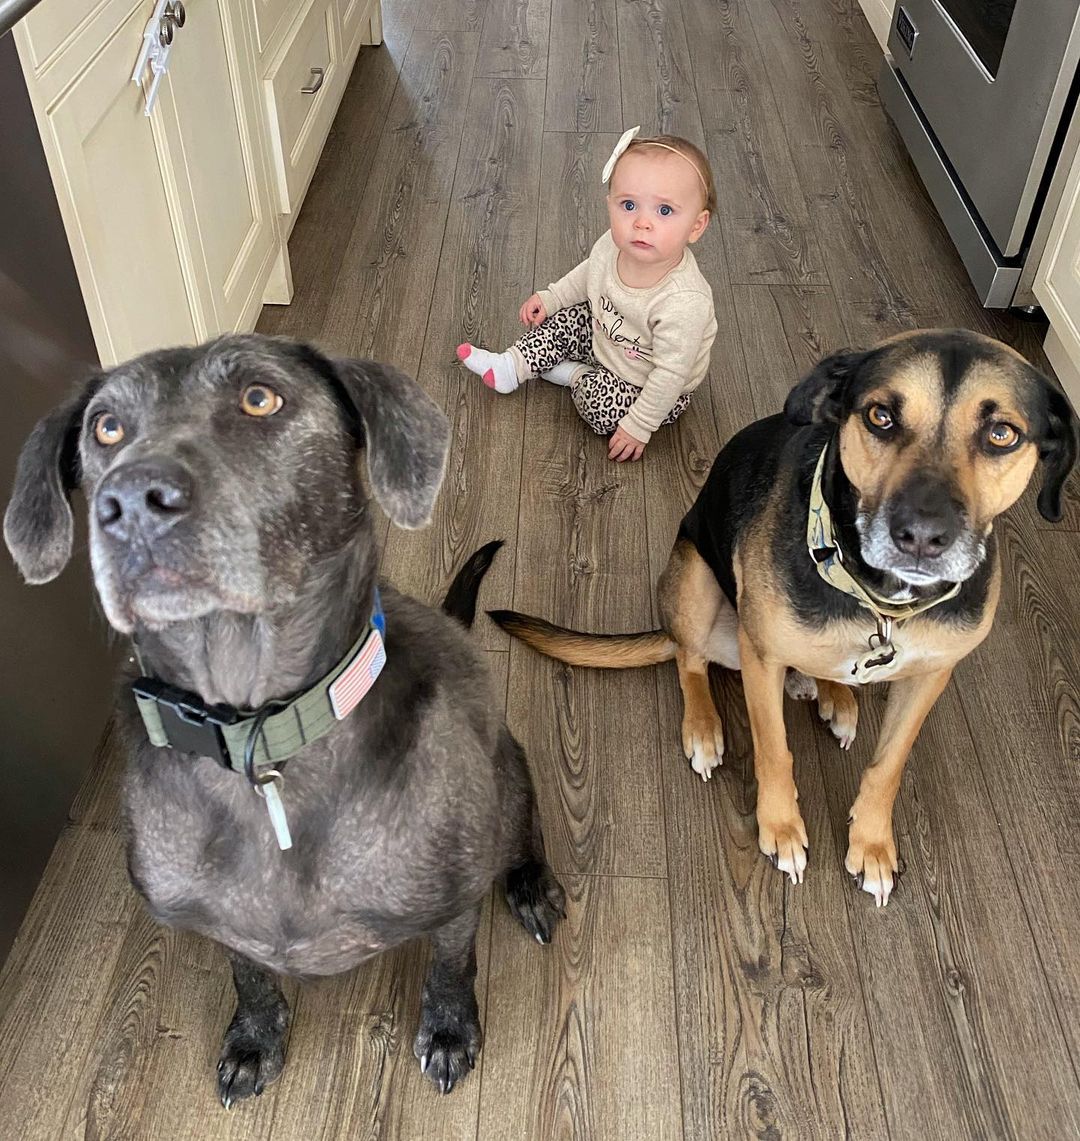 dogs sitting on the floor with baby